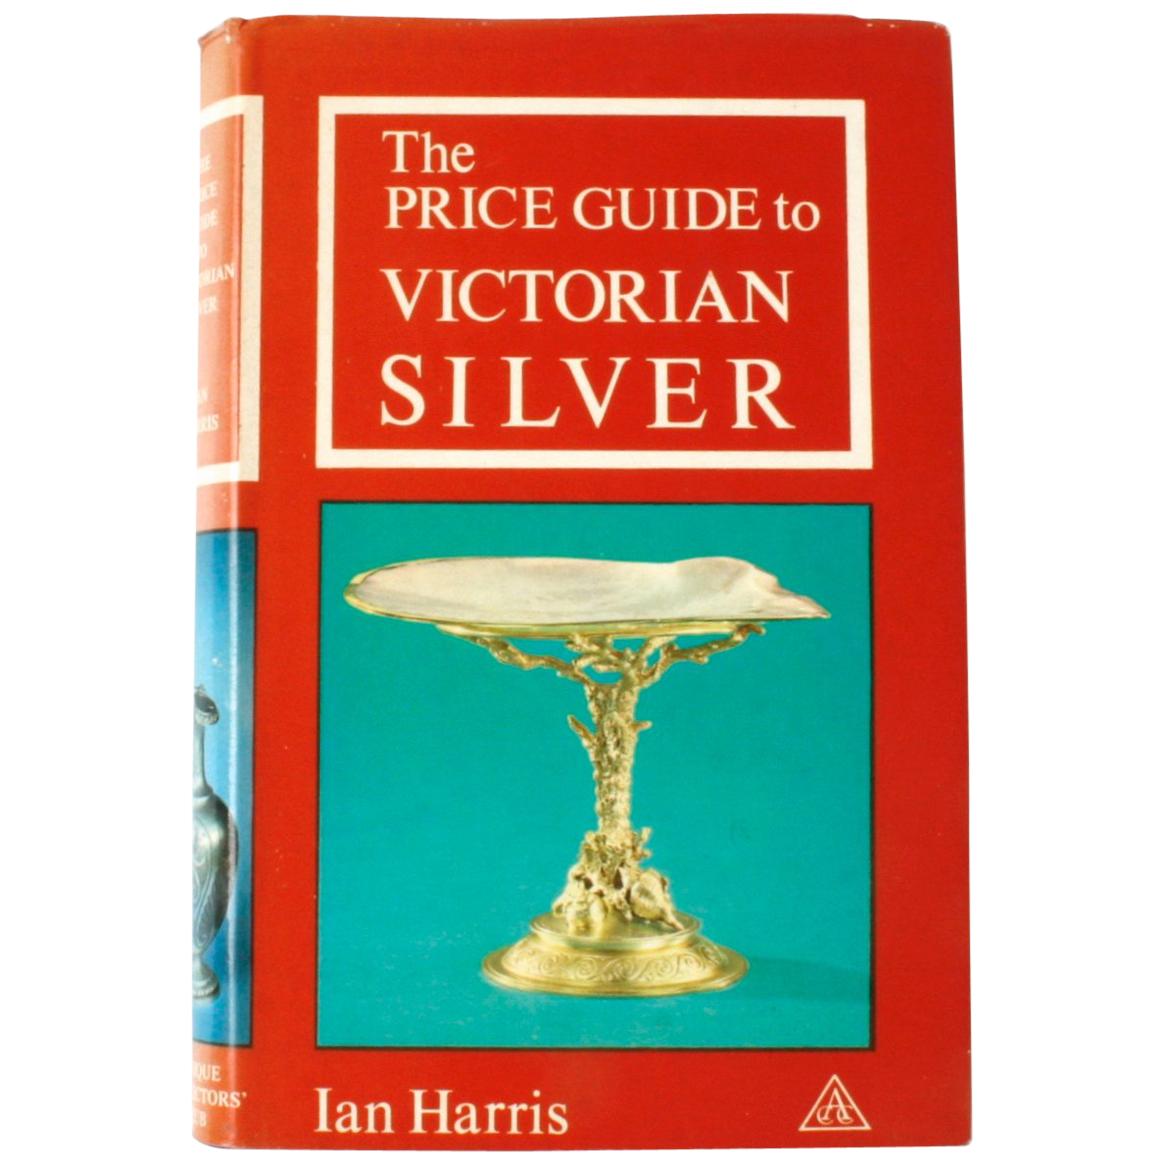 The Price Guide to Victorian Silver by Ian Harris, 1st Ed